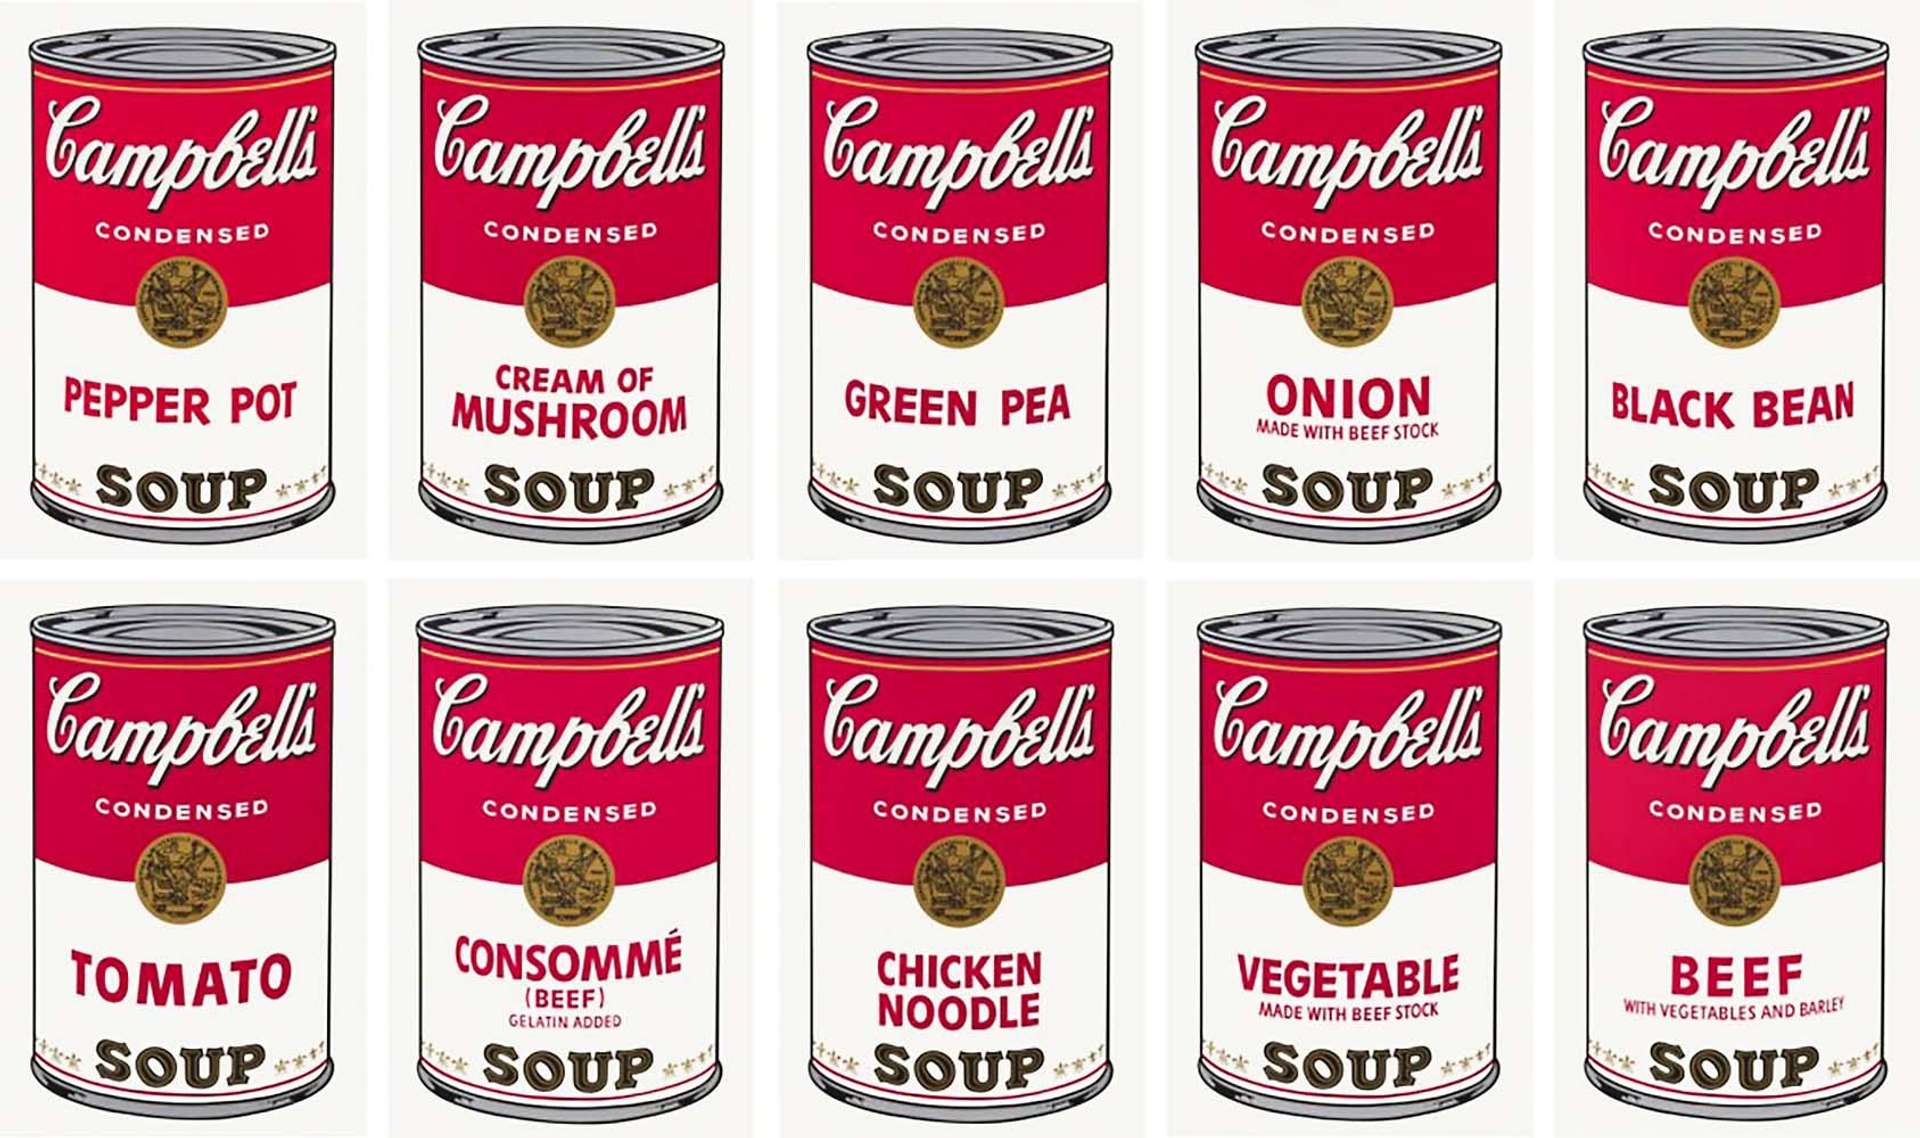 Campbell's Soup I (complete set) - Signed Print by Andy Warhol 1968 - MyArtBroker